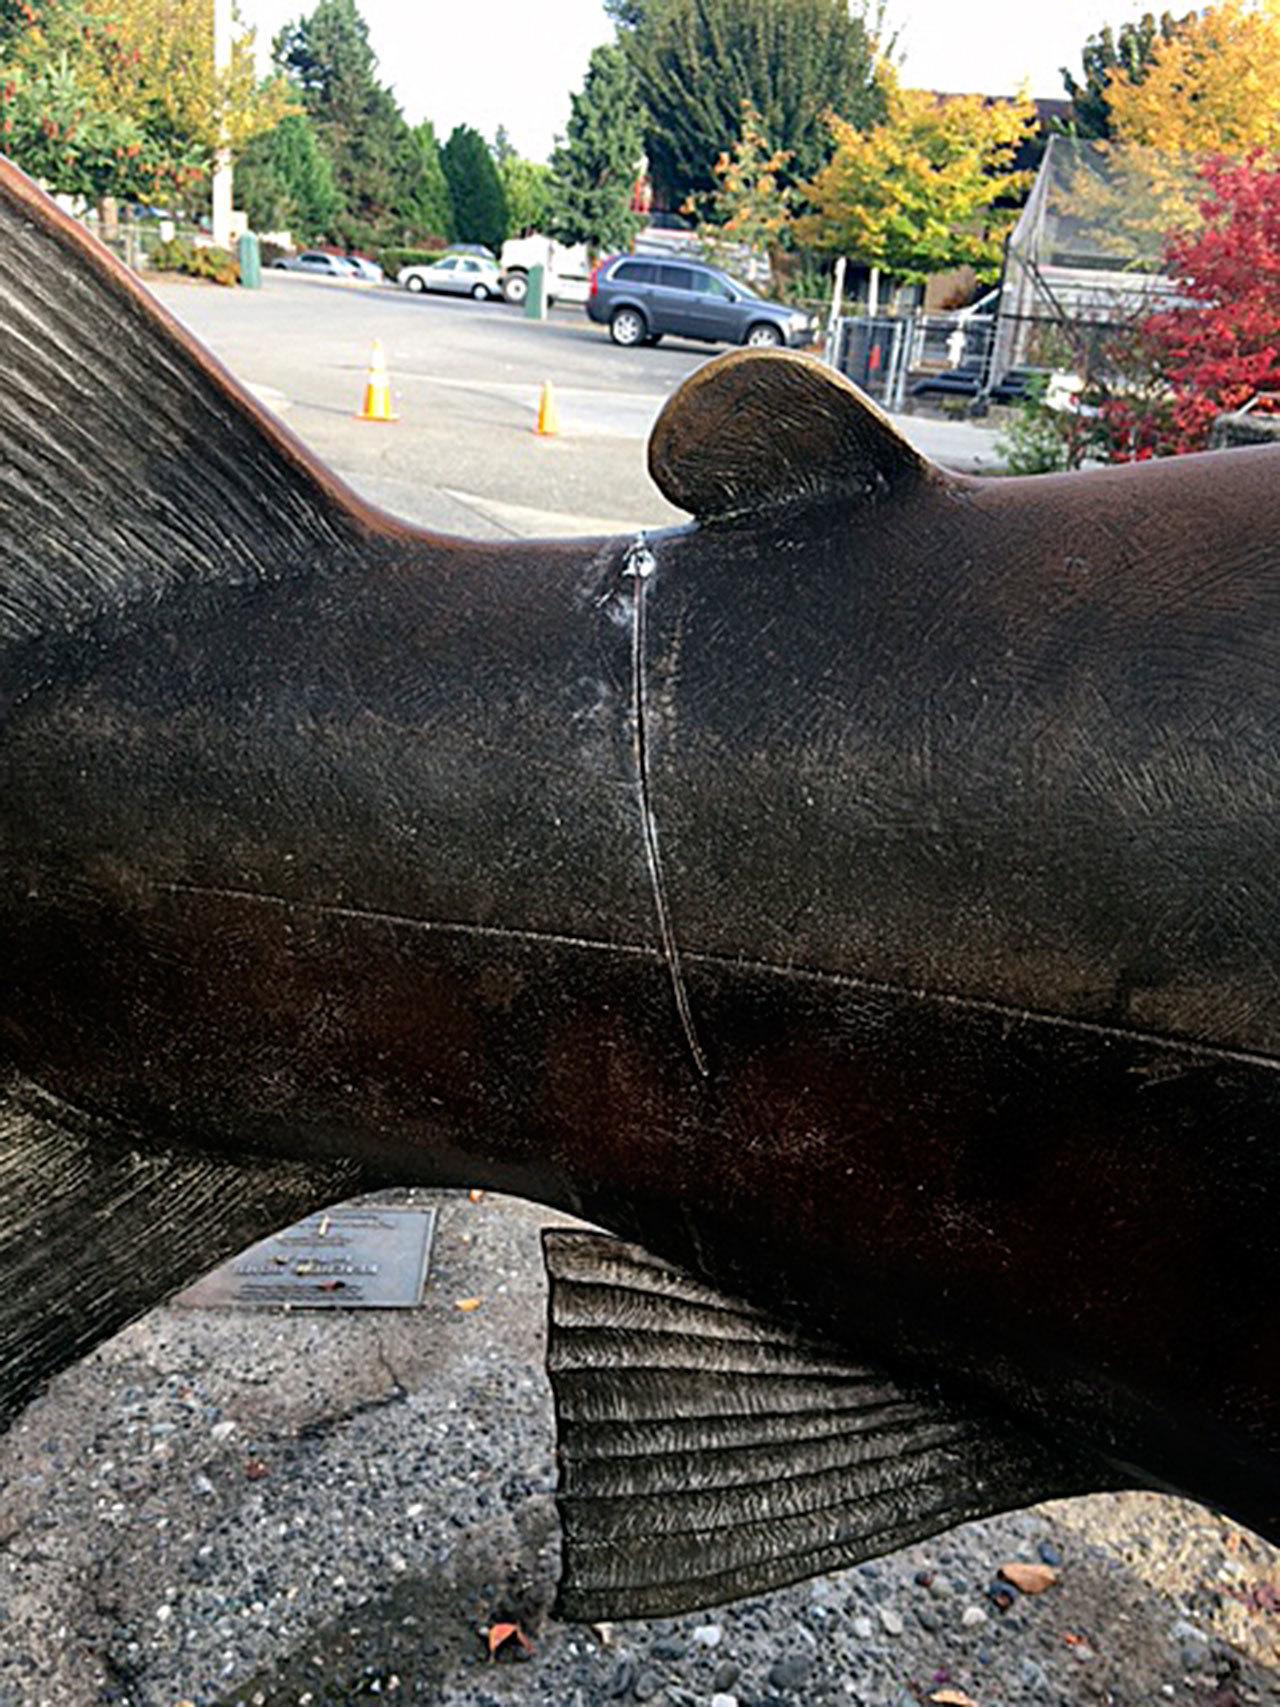 An unknown vandal made the deep cut on Finley in October 2016 with a saw. Photo courtesy of Robin Kelley